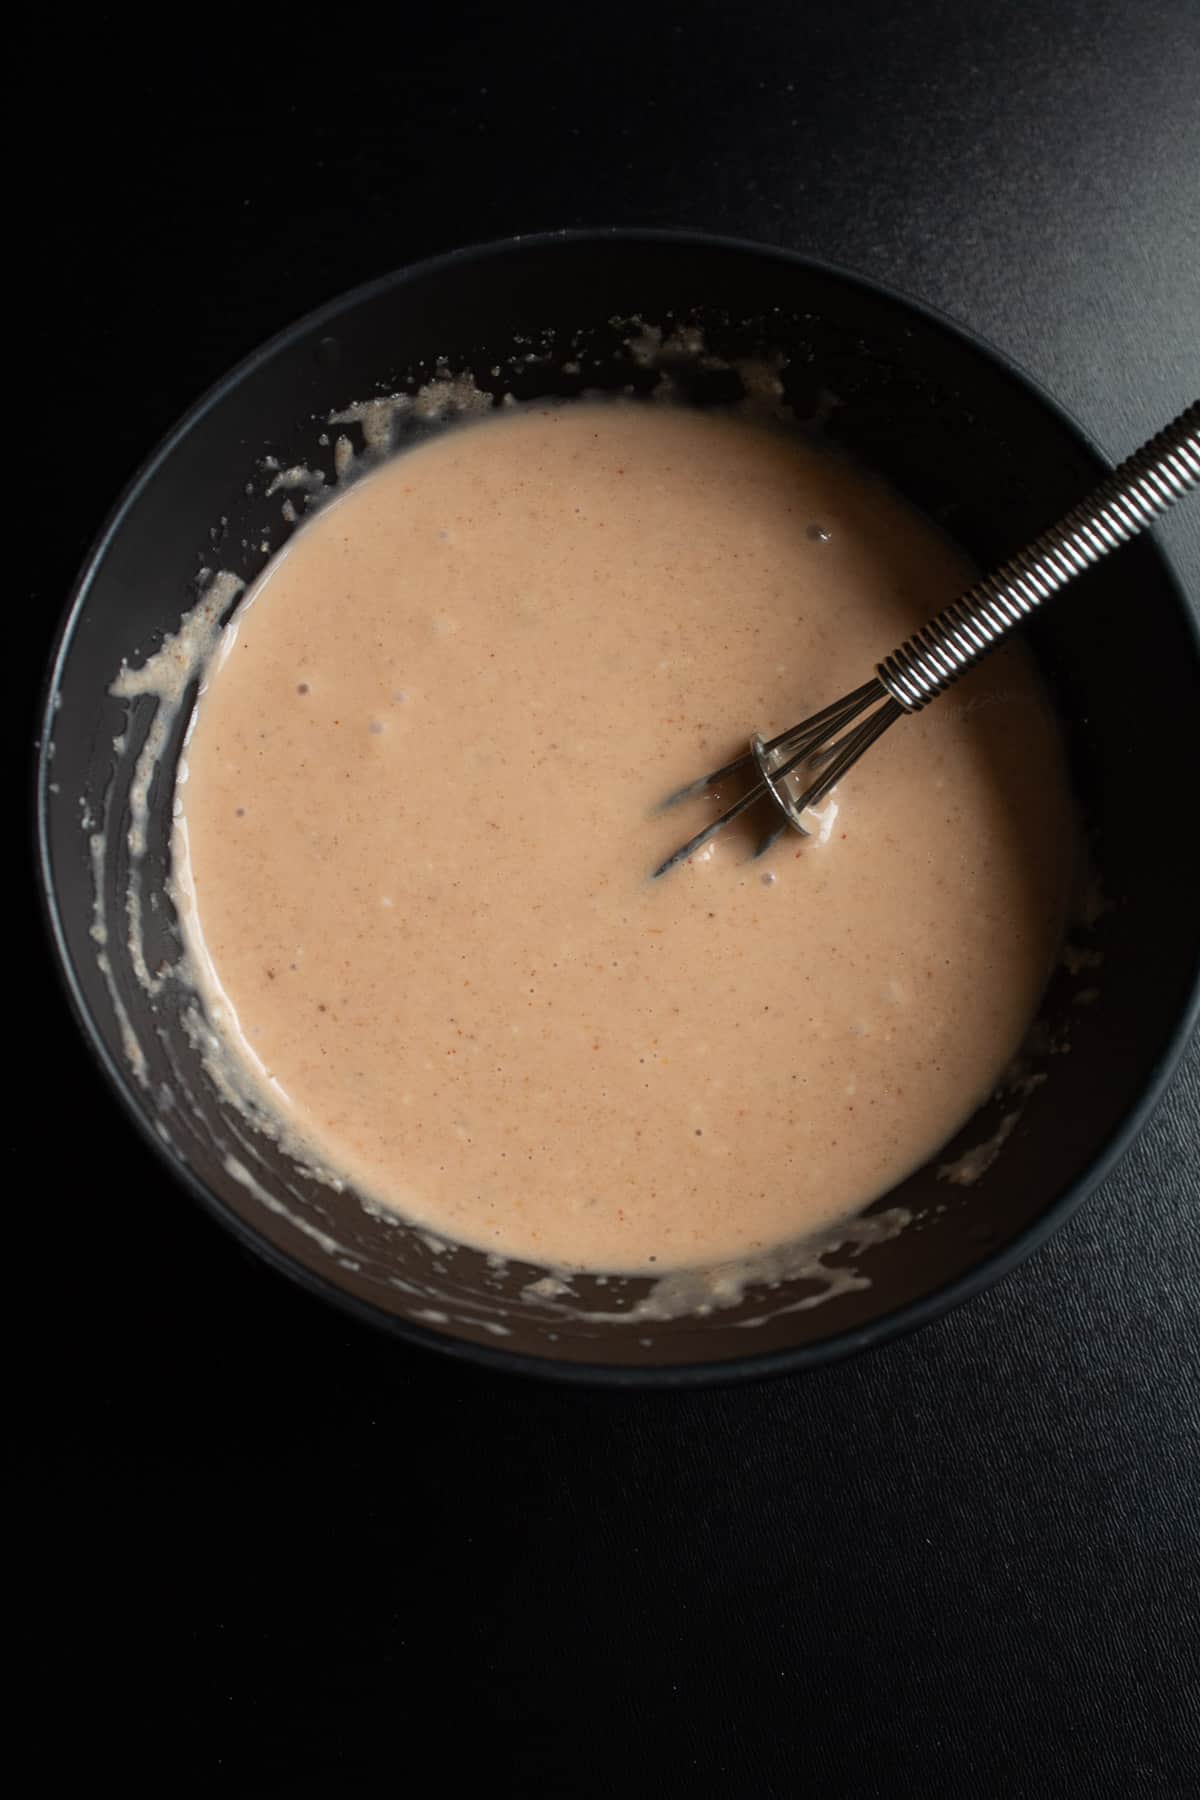 The special sauce whisked together in a small black bowl.